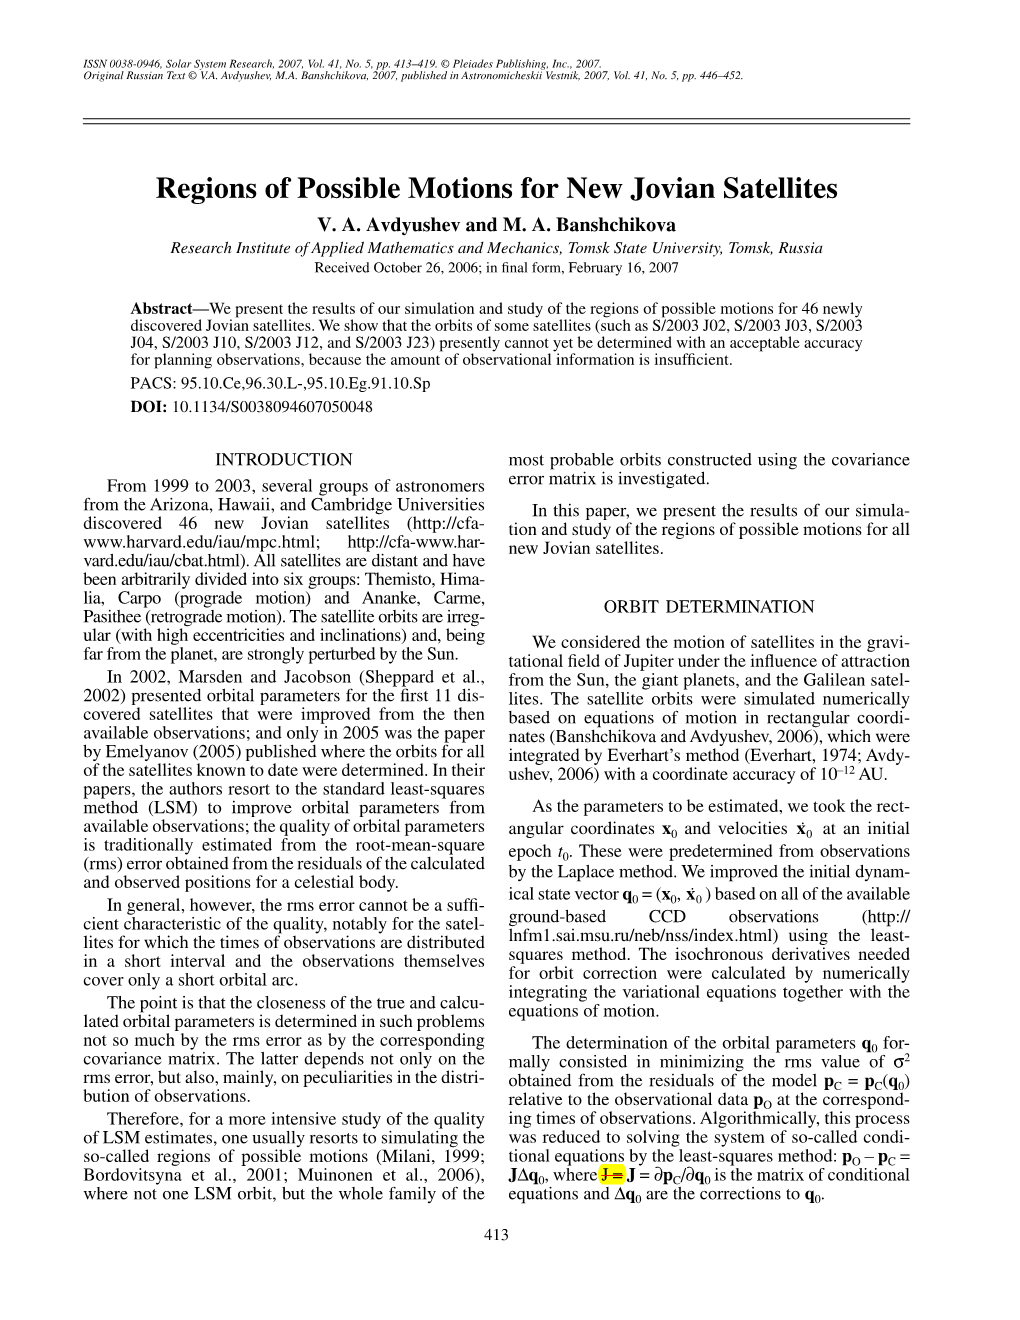 Regions of Possible Motions for New Jovian Satellites V